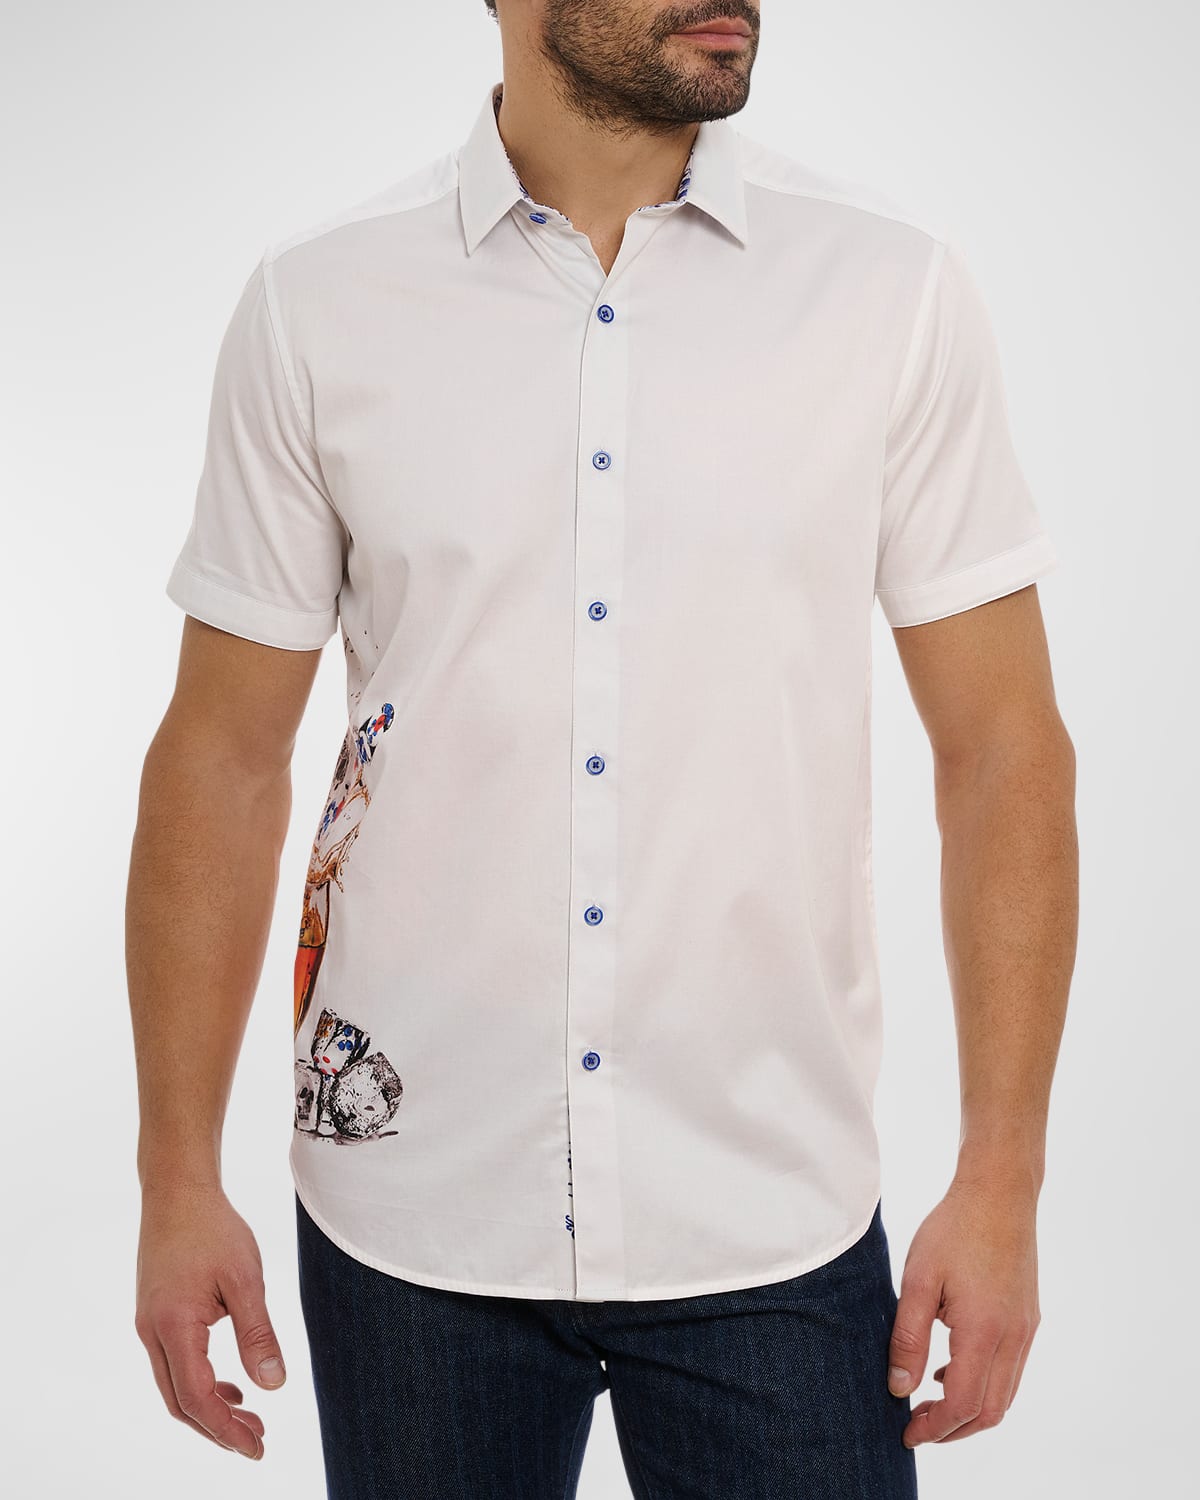 Men's Ice and Dice Short-Sleeve Shirt